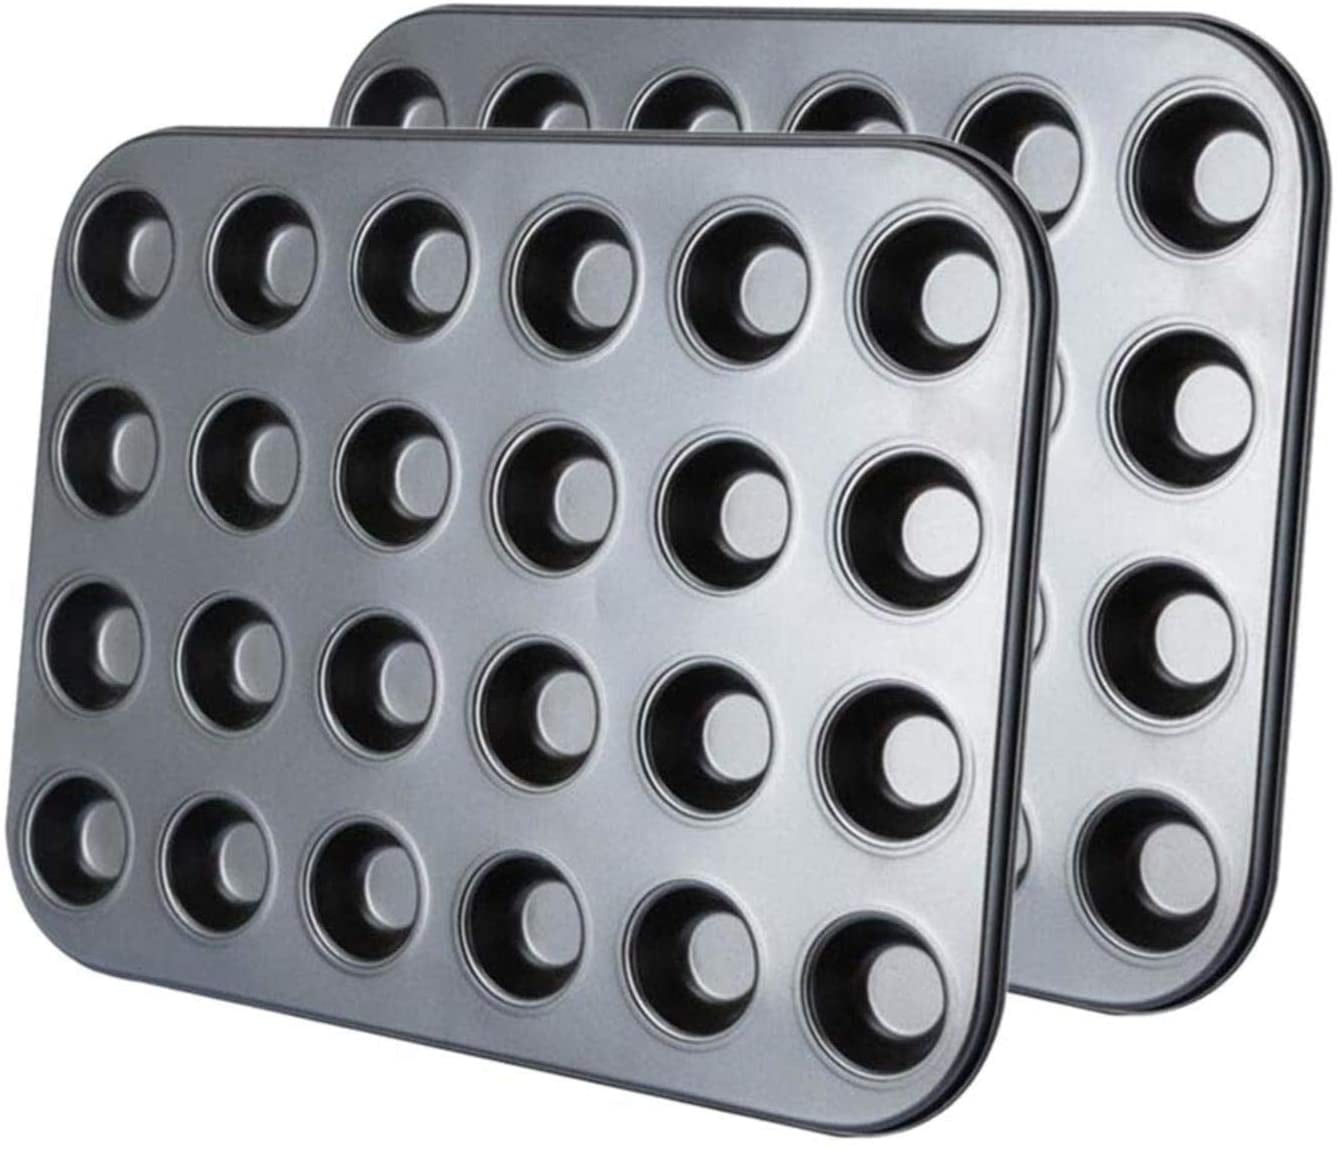 Nonstick Carbon Steel Mini Cupcake Molds Details about   Muffin Pan Tray Set of 2 24 Cups 